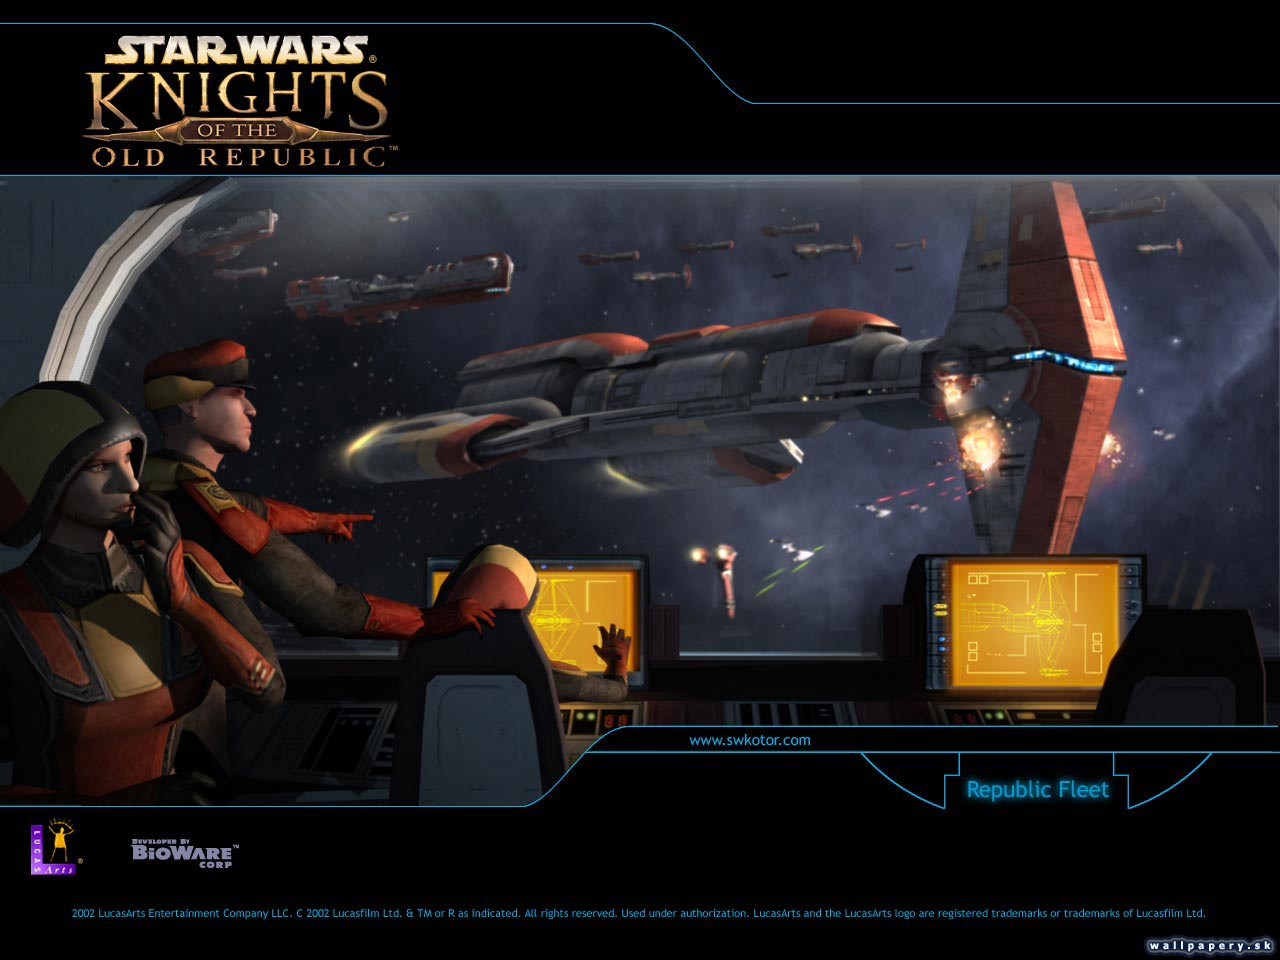 Star Wars: Knights of the Old Republic - wallpaper 15